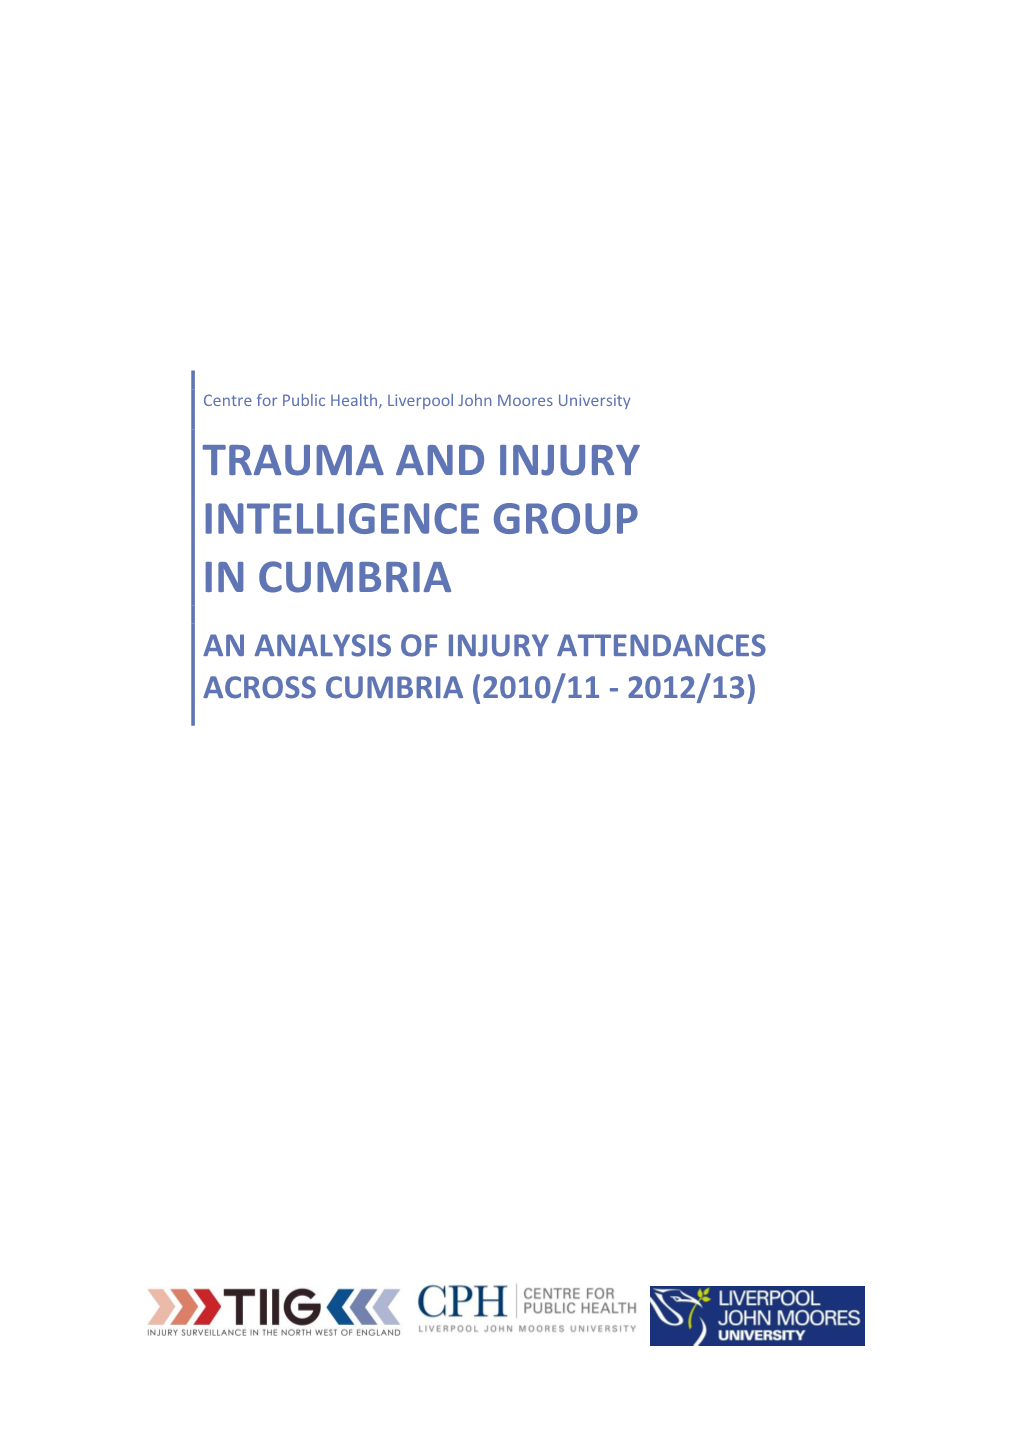 Trauma and Injury Intelligence Group in Cumbria an Analysis of Injury Attendances Across Cumbria (2010/11 - 2012/13)